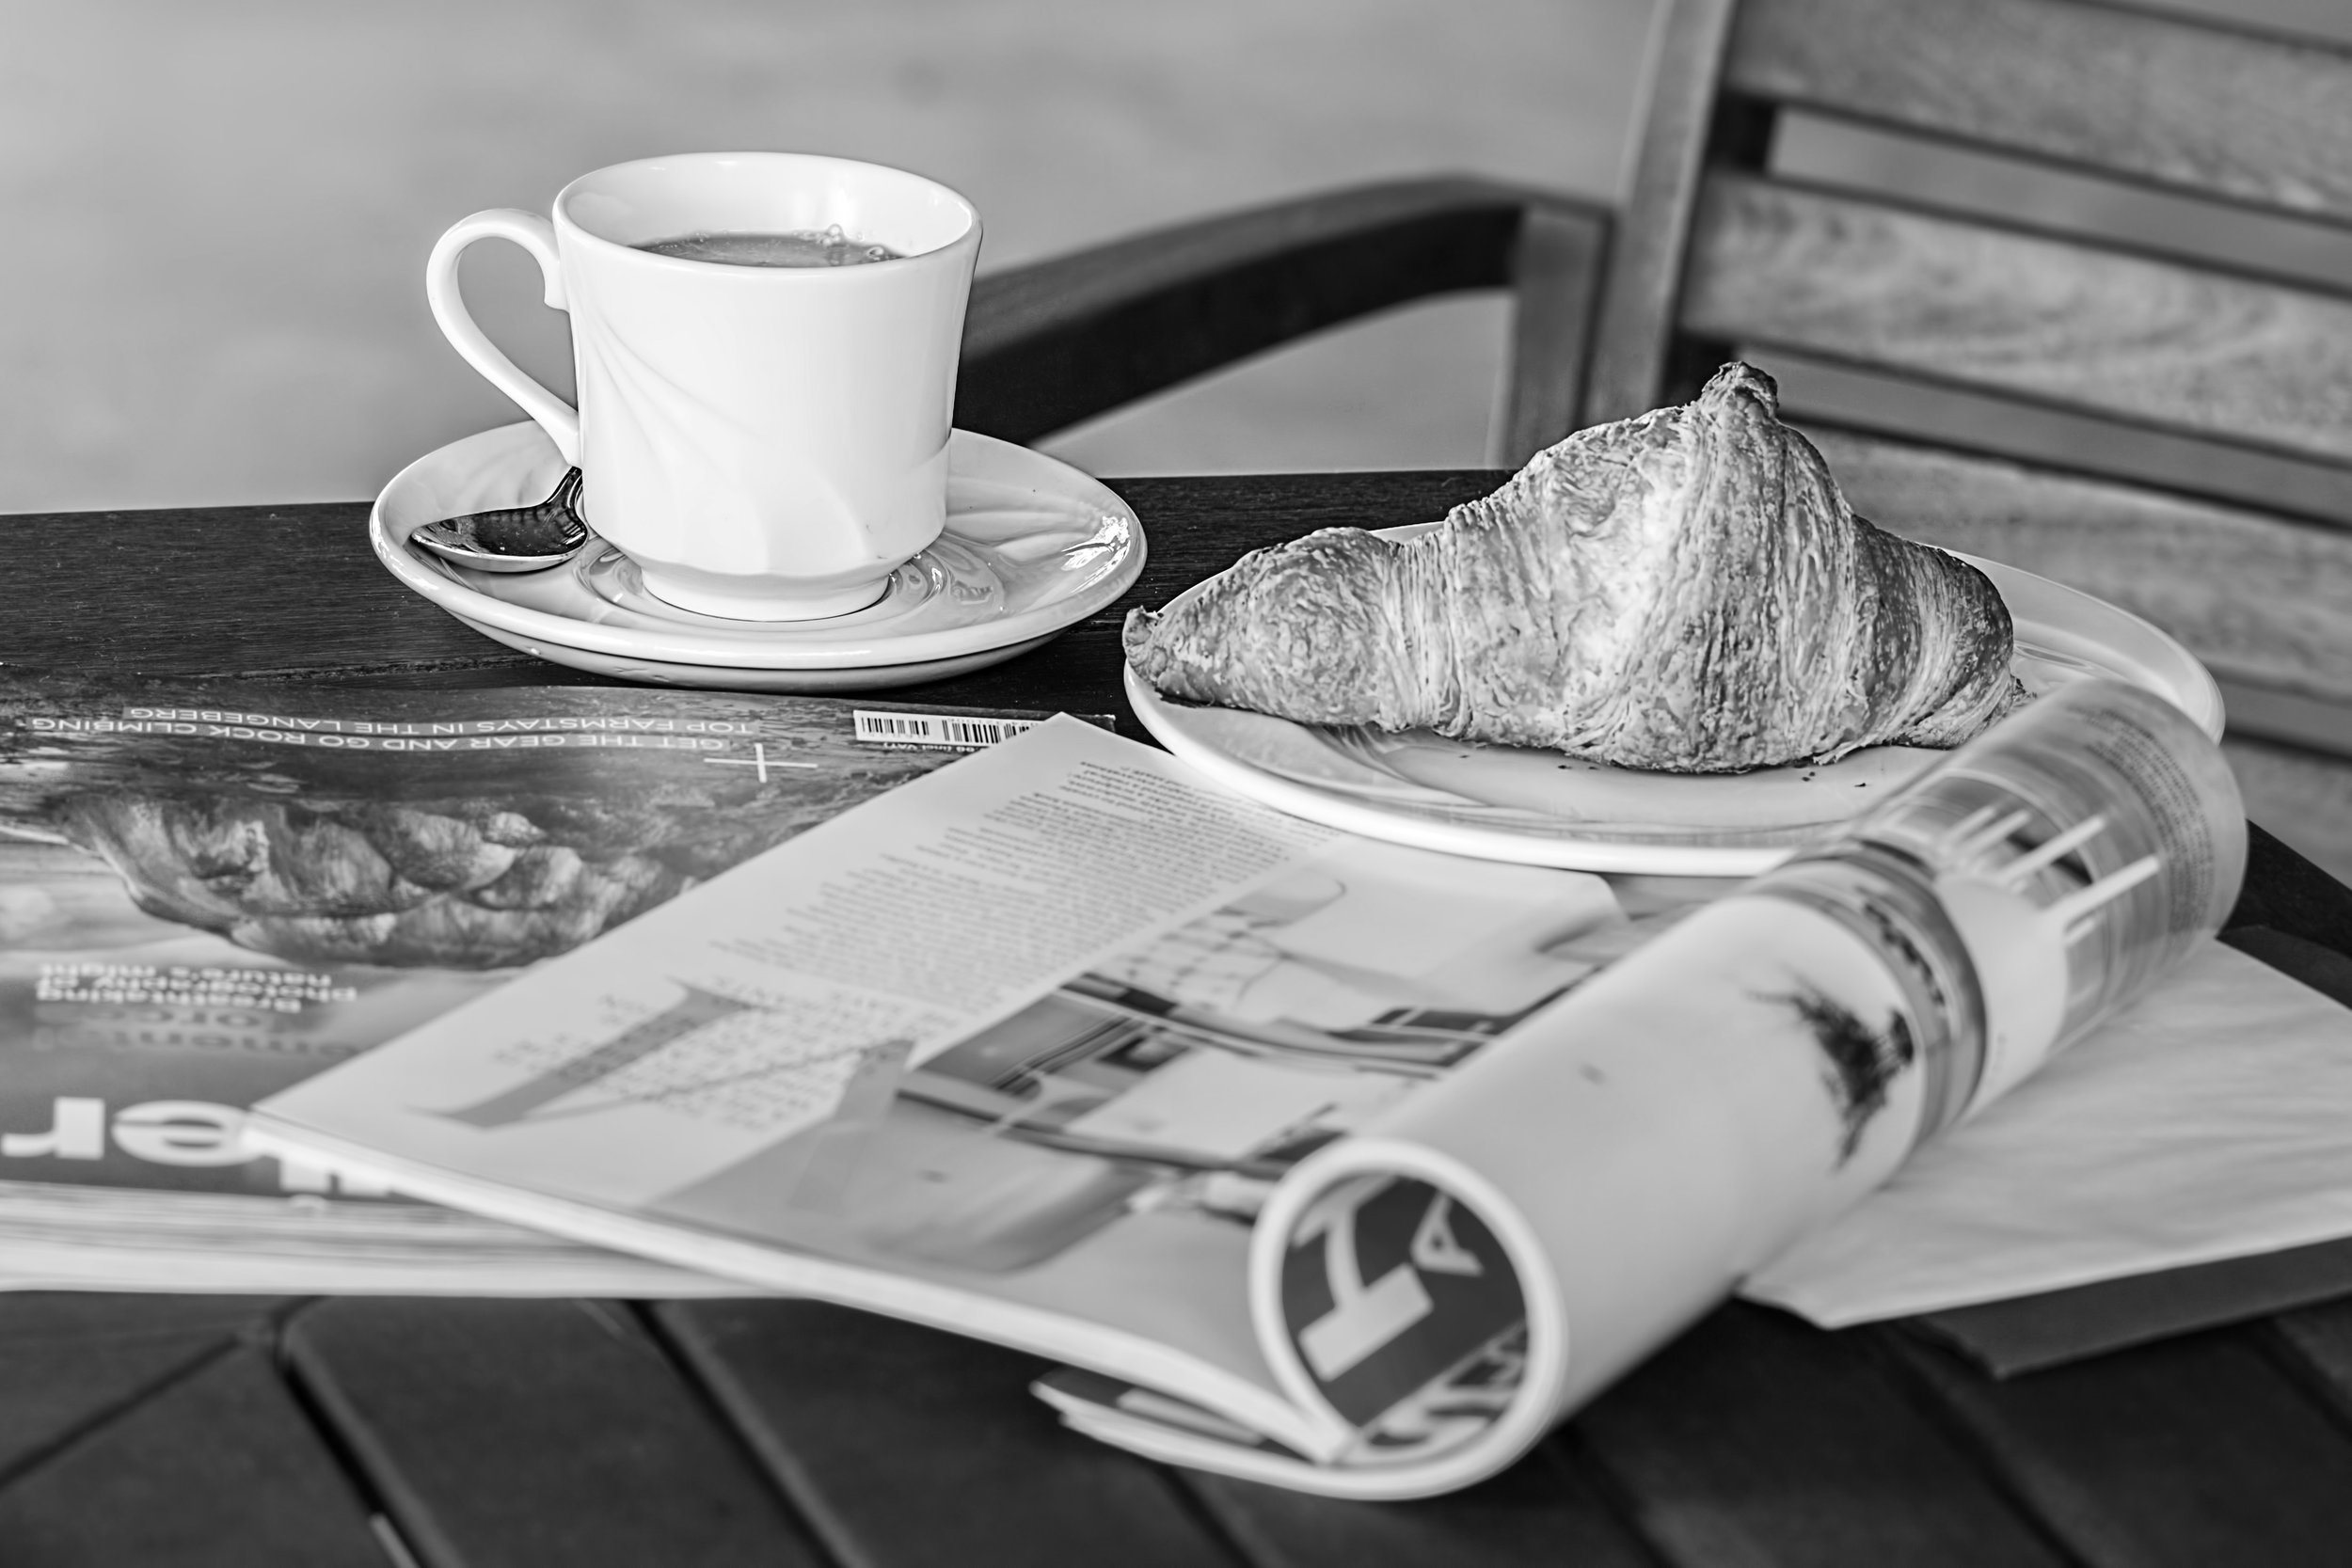 A cup of coffee and a croissant sit on top of two magazines on a wooden table.